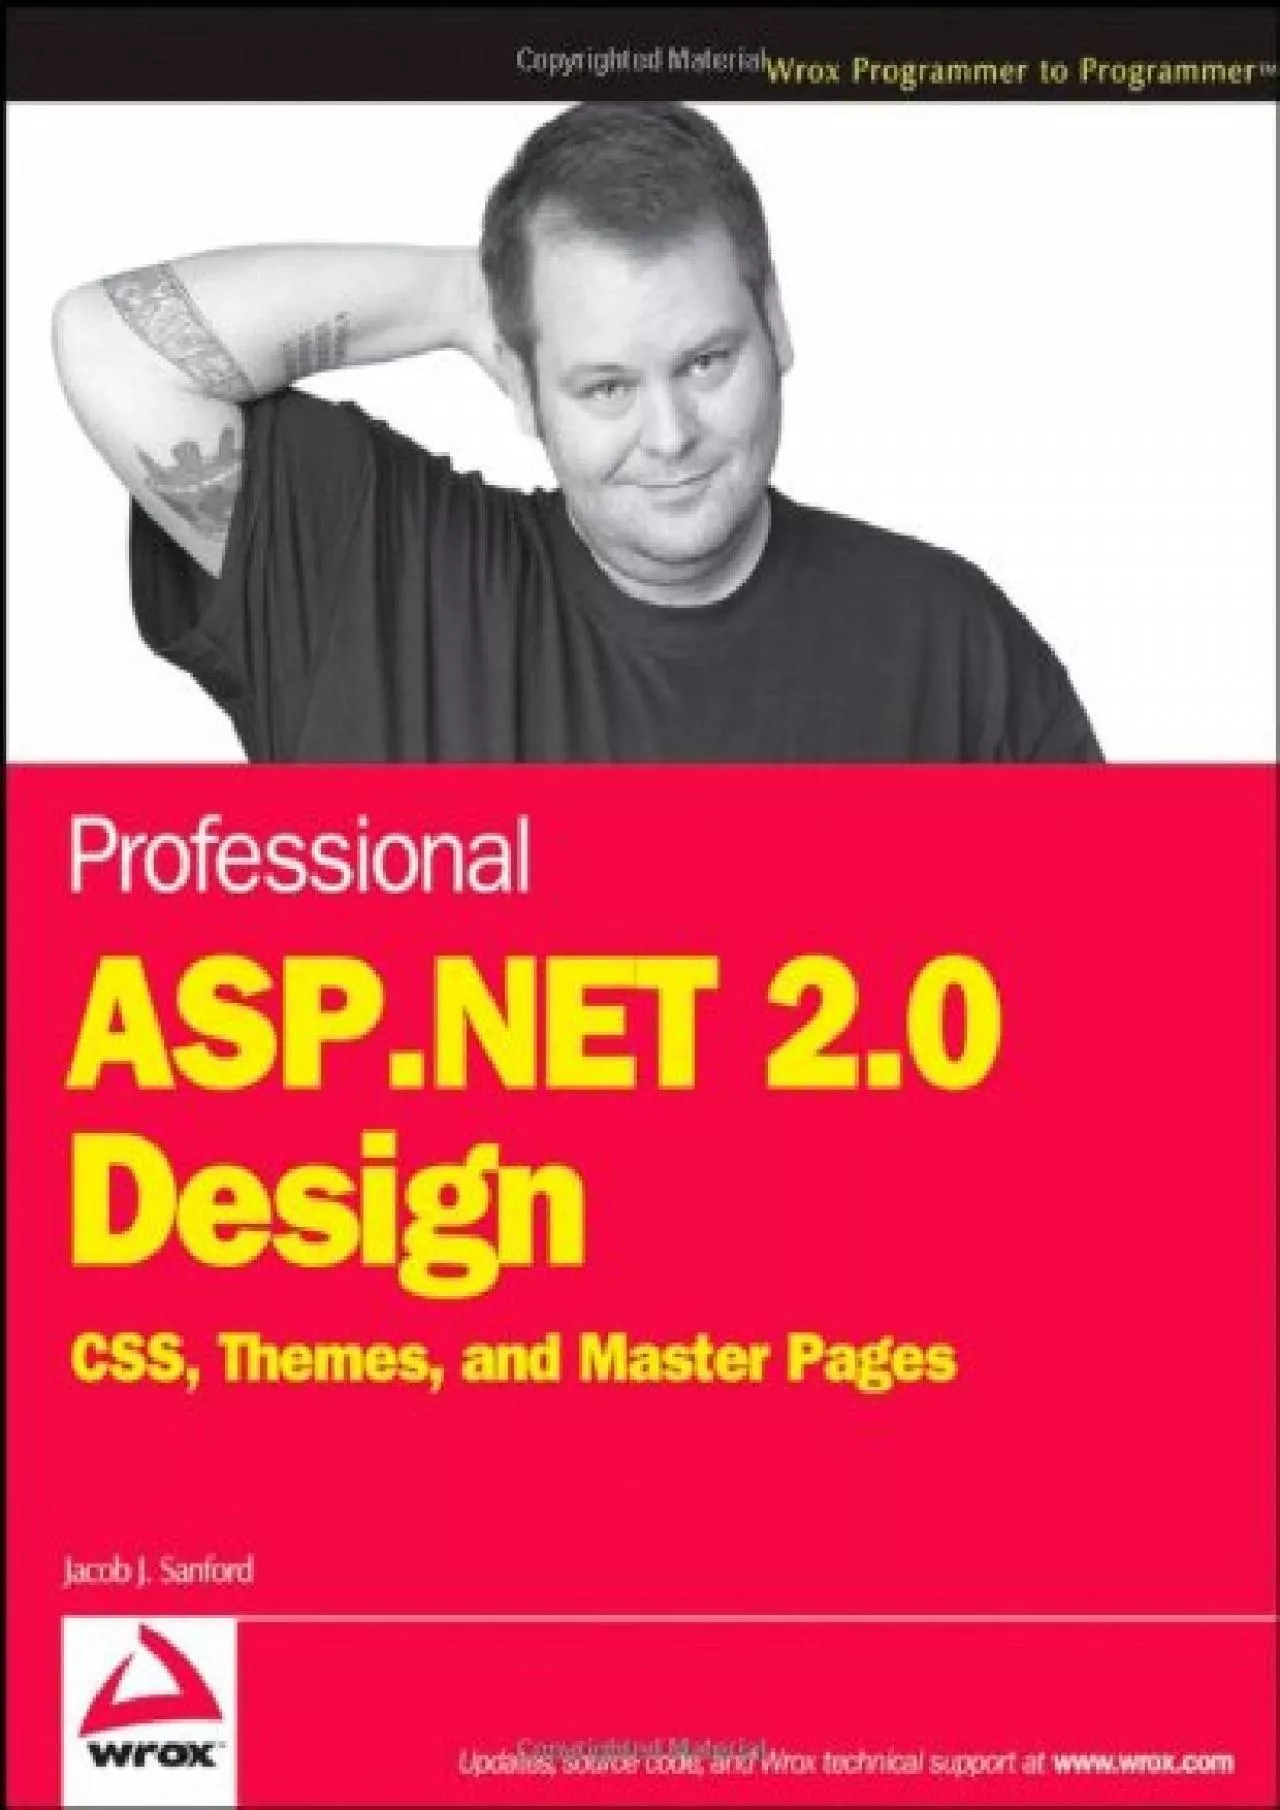 [DOWLOAD]-Professional ASP.NET 2.0 Design: CSS, Themes, and Master Pages